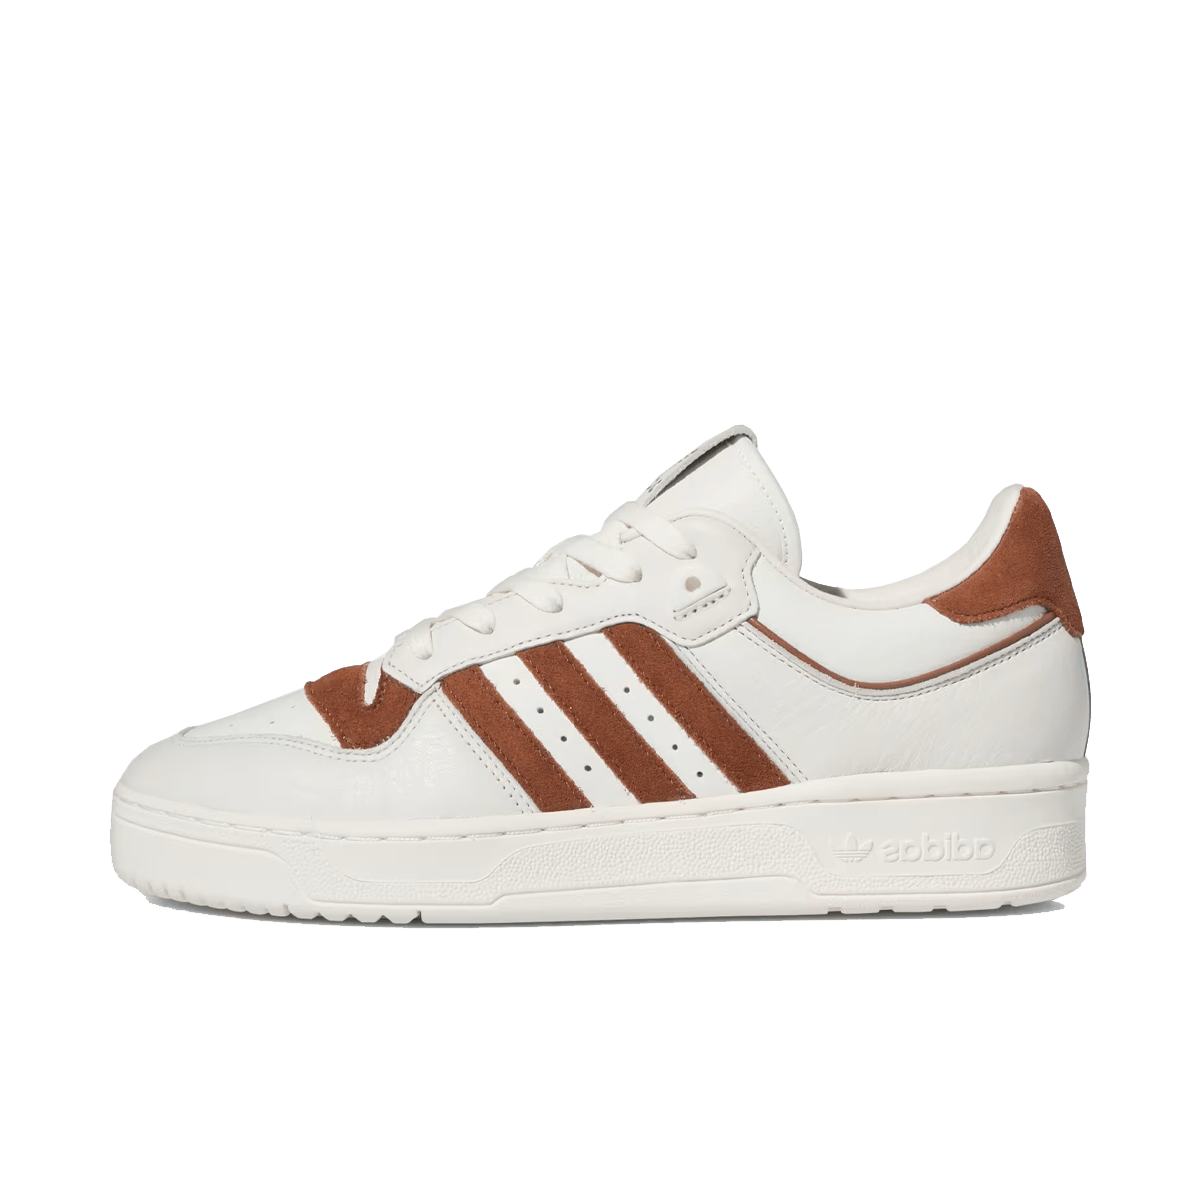 adidas Rivalry 86 Low 'Preloved Brown' ID8406